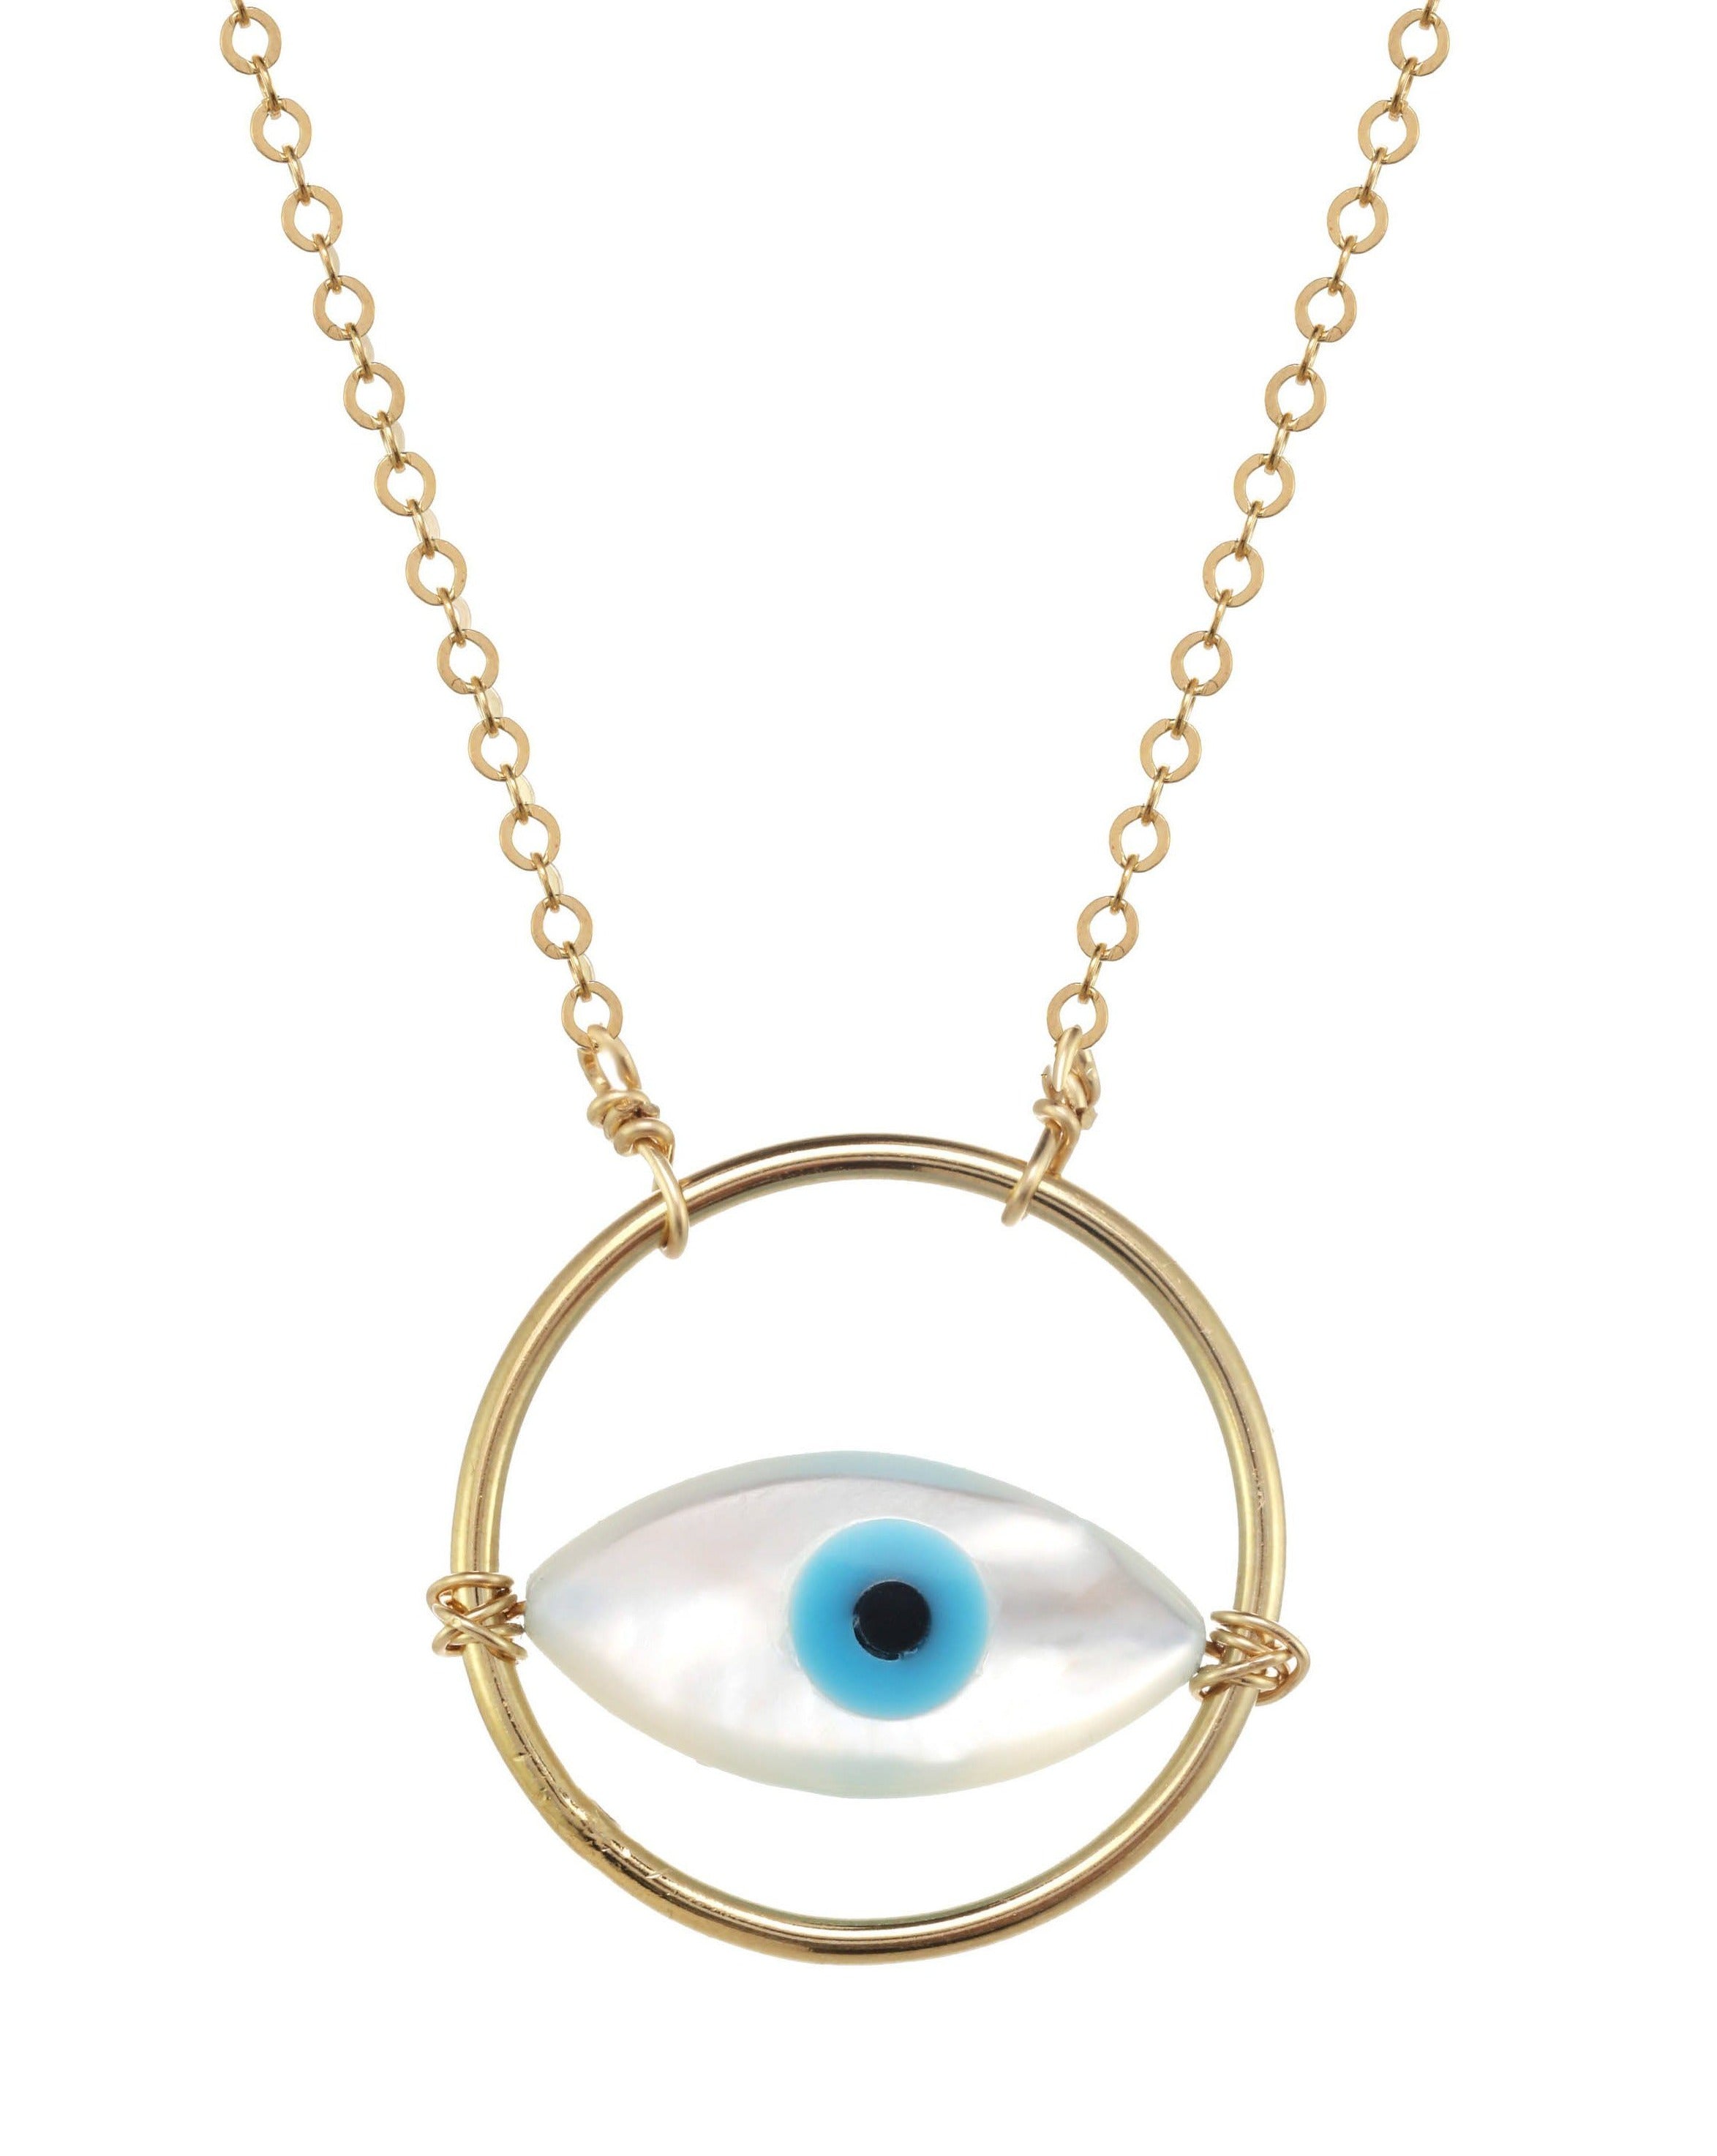 Ino Necklace by KOZAKH. A 16 to 18 inch adjustable length necklace in 14K Gold Filled, featuring a hand carved Mother of Pearl Evil Eye charm inside a ring.